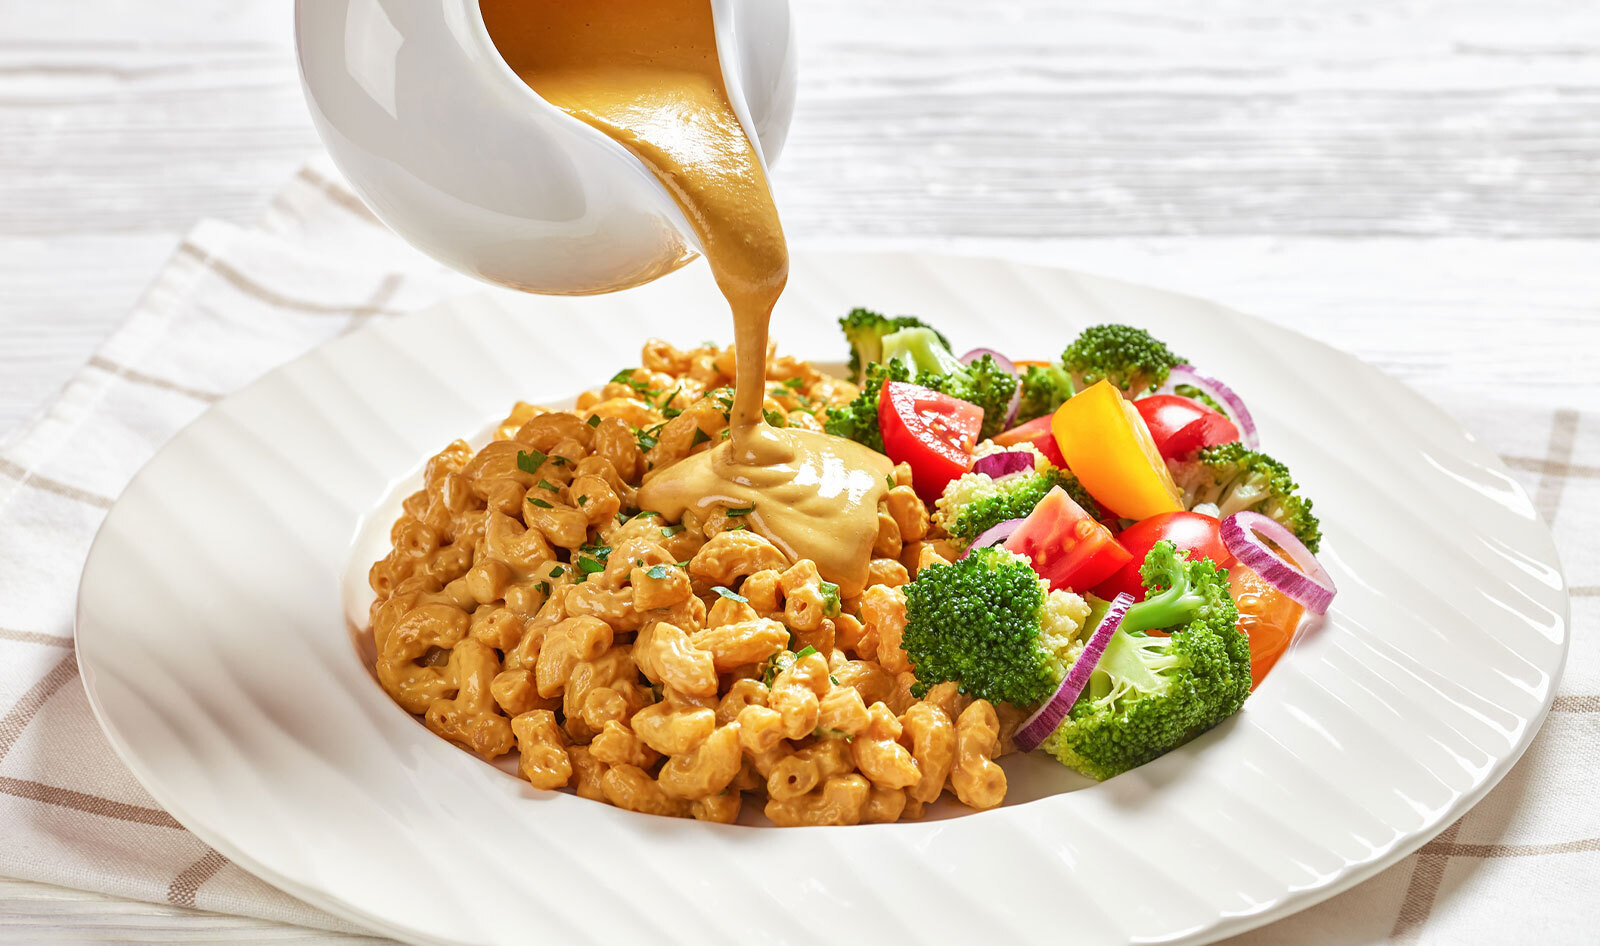 Your Vegan Mac and Cheese Hack Could Win You $10,000 From Kraft